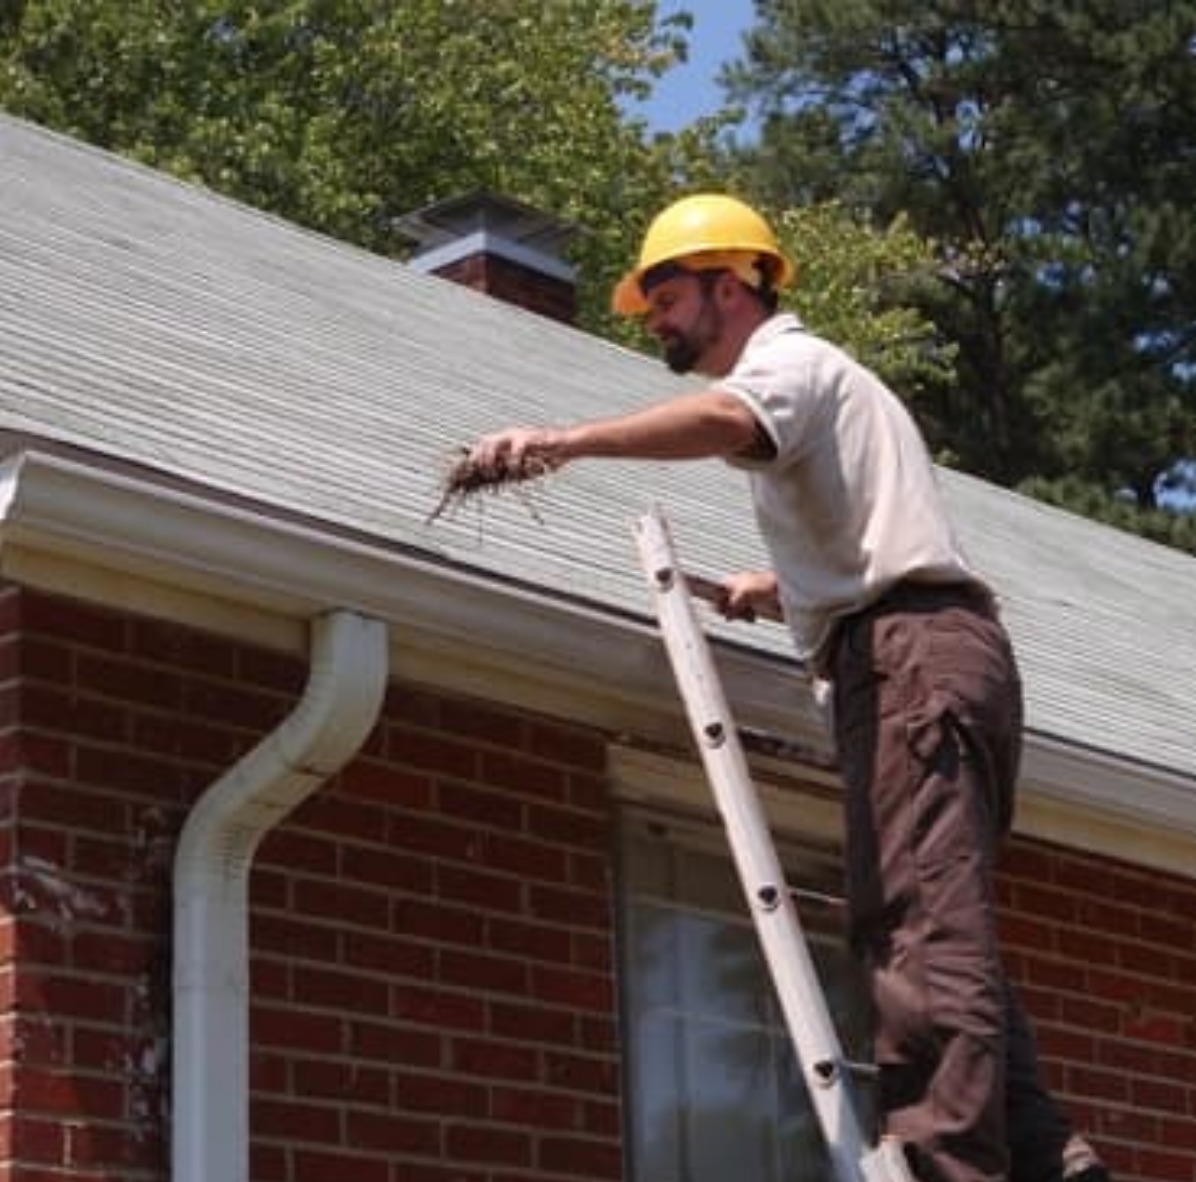 Verplanck NY Gutter Cleaning Company